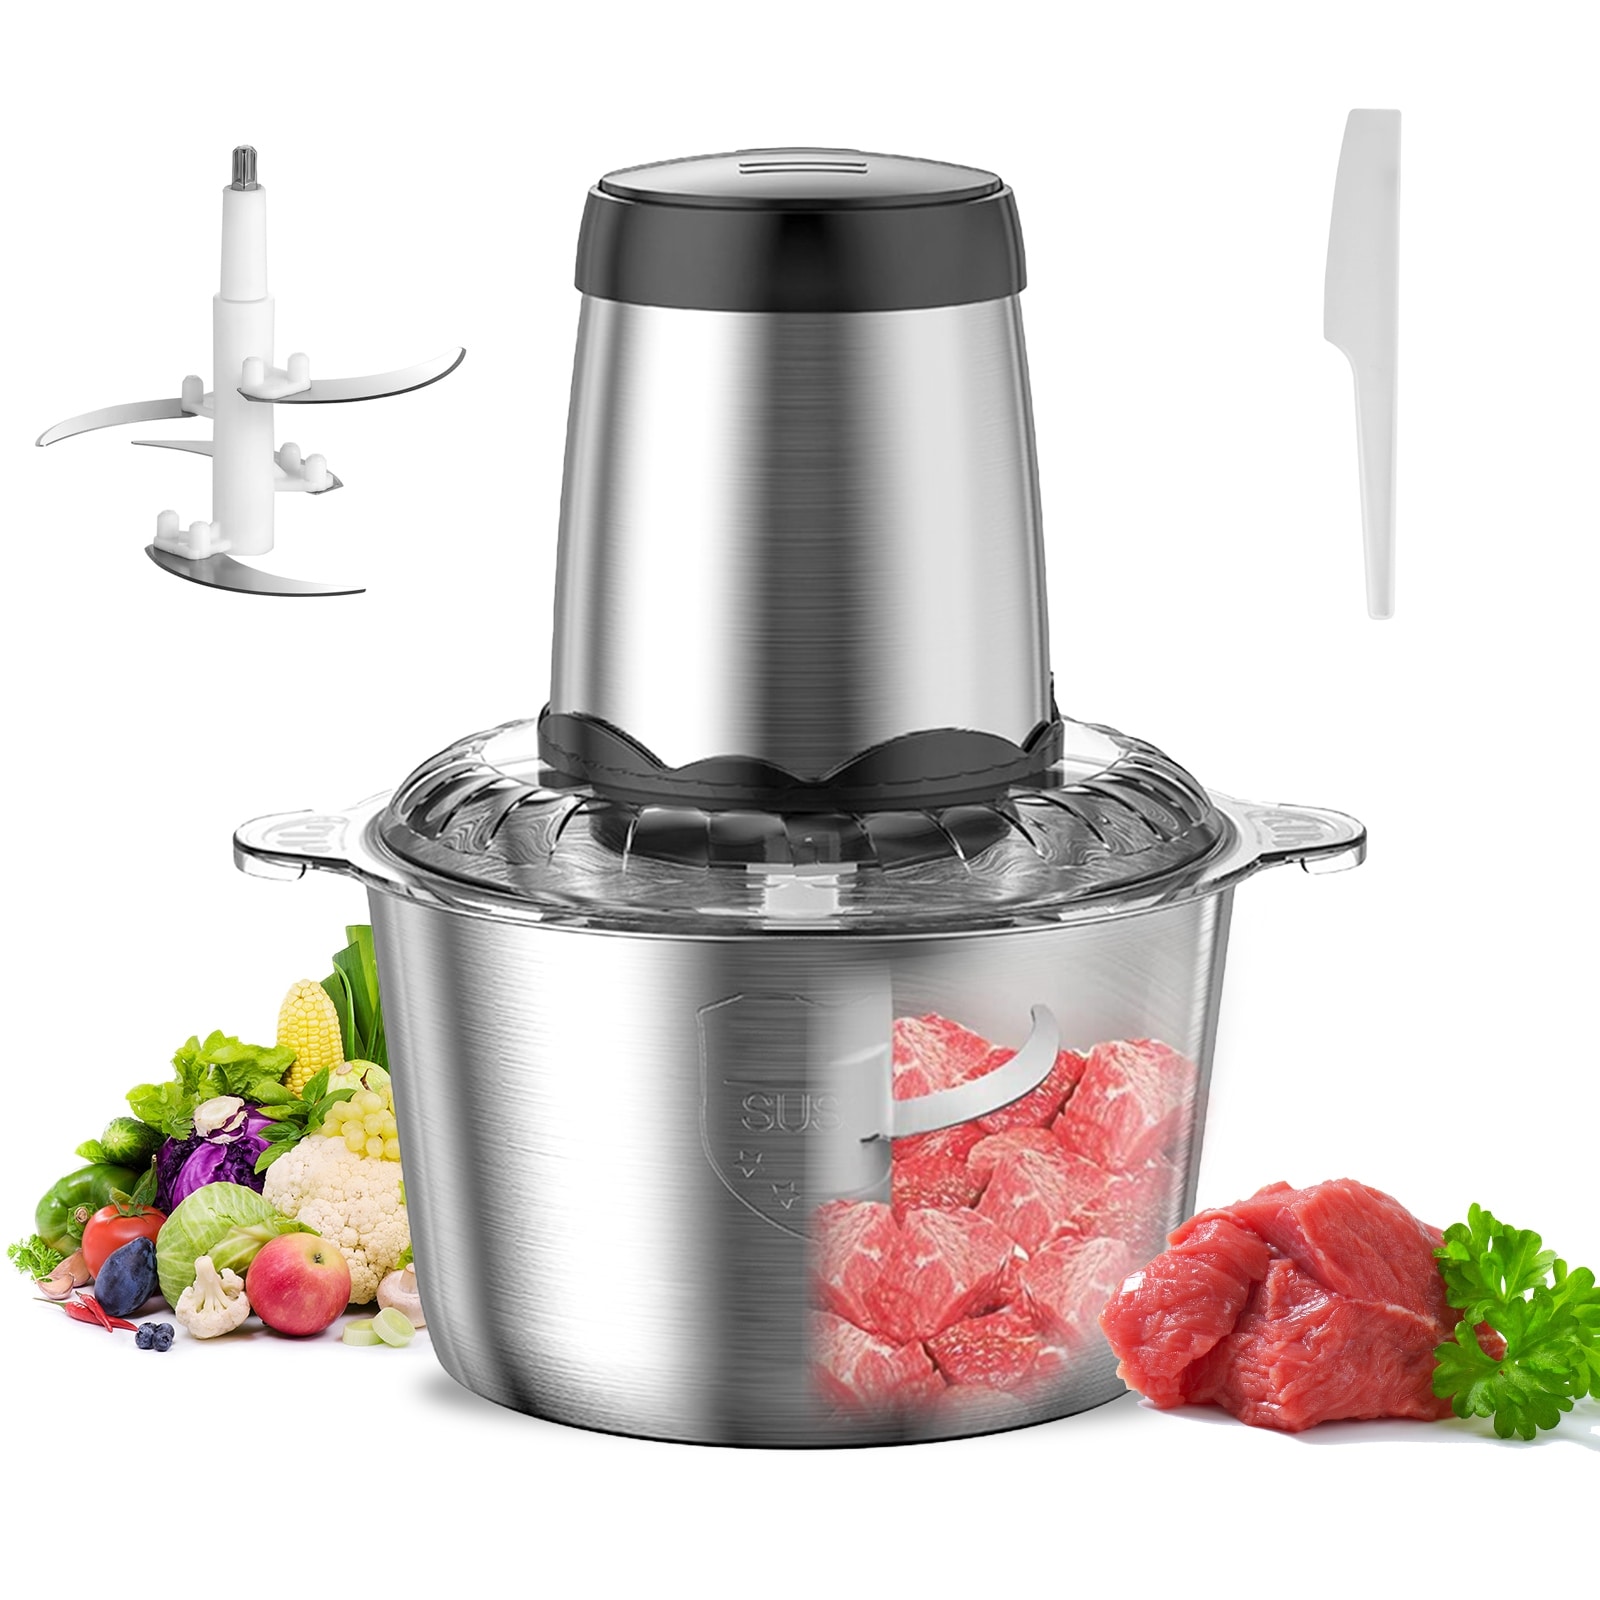 https://ak1.ostkcdn.com/images/products/is/images/direct/2d1b9743de480237520e7b0ef1ceebe45dc504ca/Stainless-Steel-Meat-Grinder-Food-Chopper-Processor-Home-110V-300W.jpg